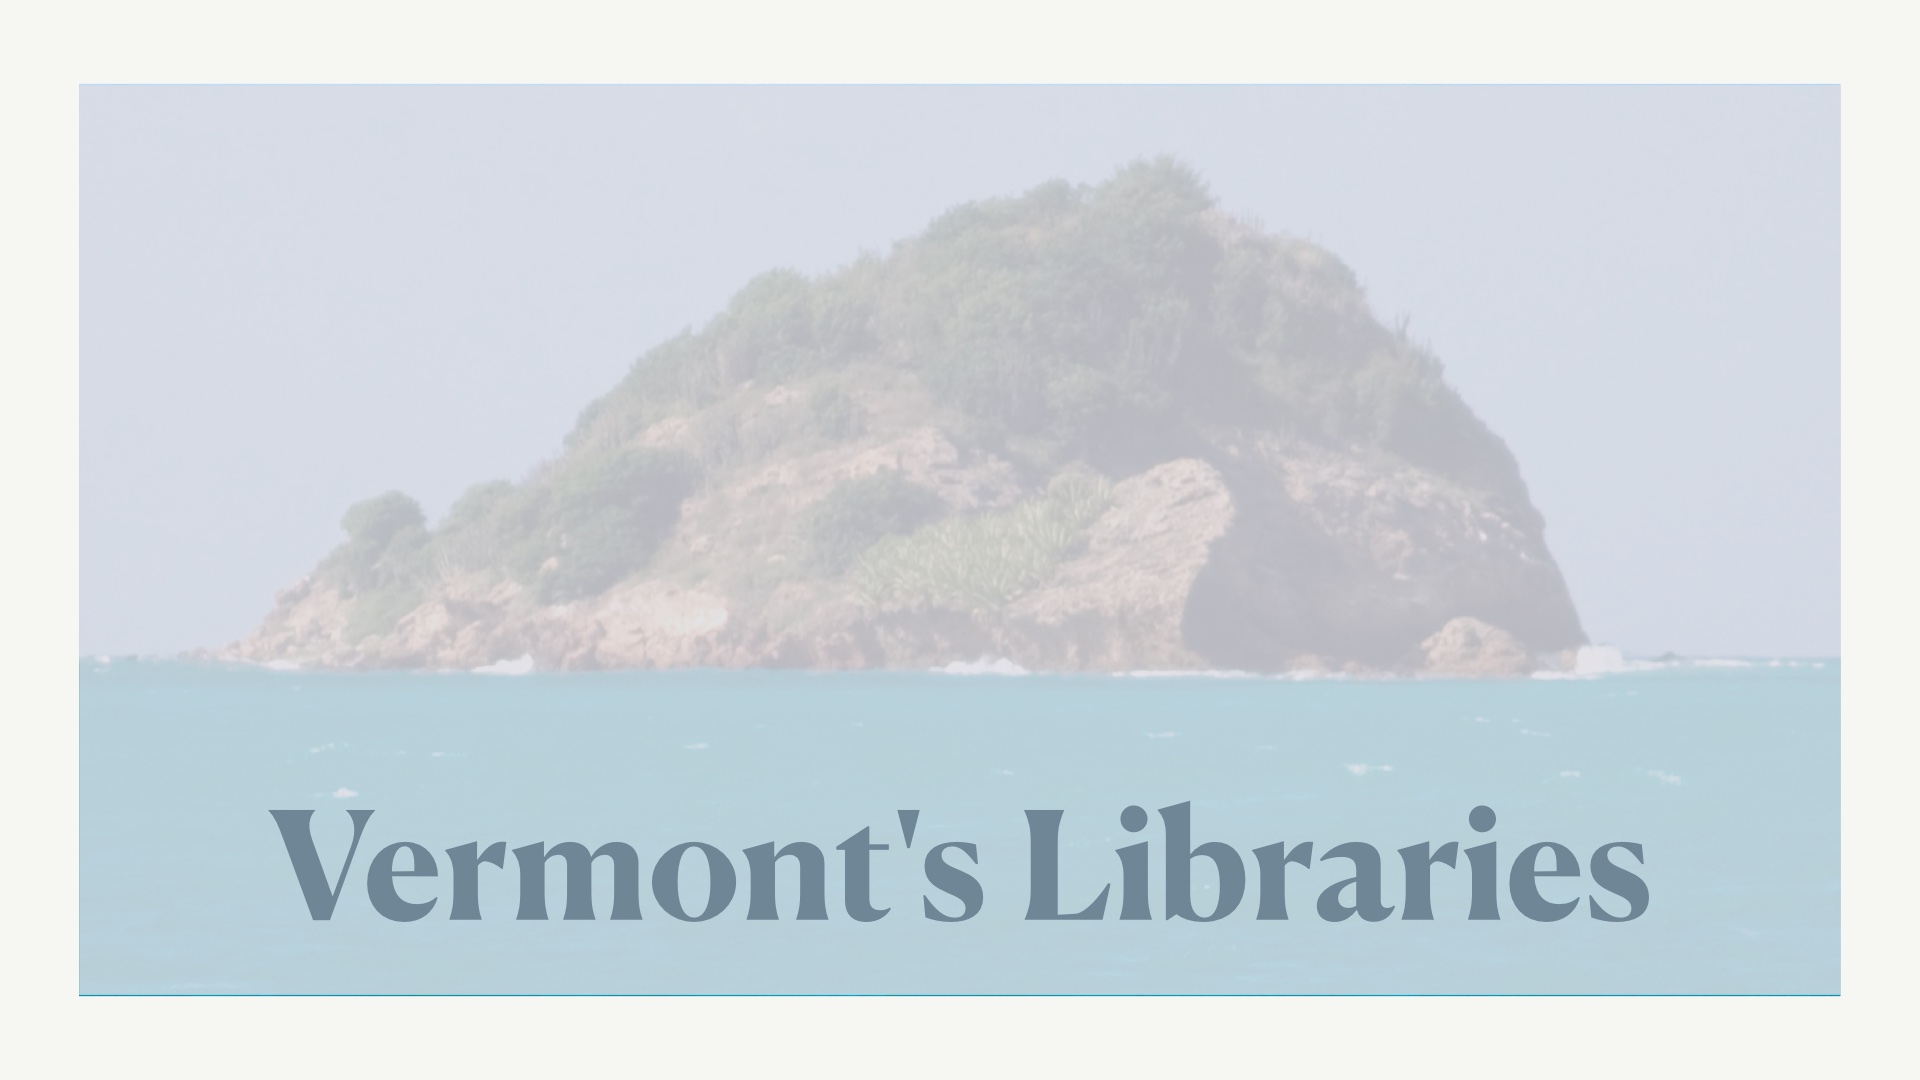 [photograph of one island close-up with caption Vermont's Libraries] 